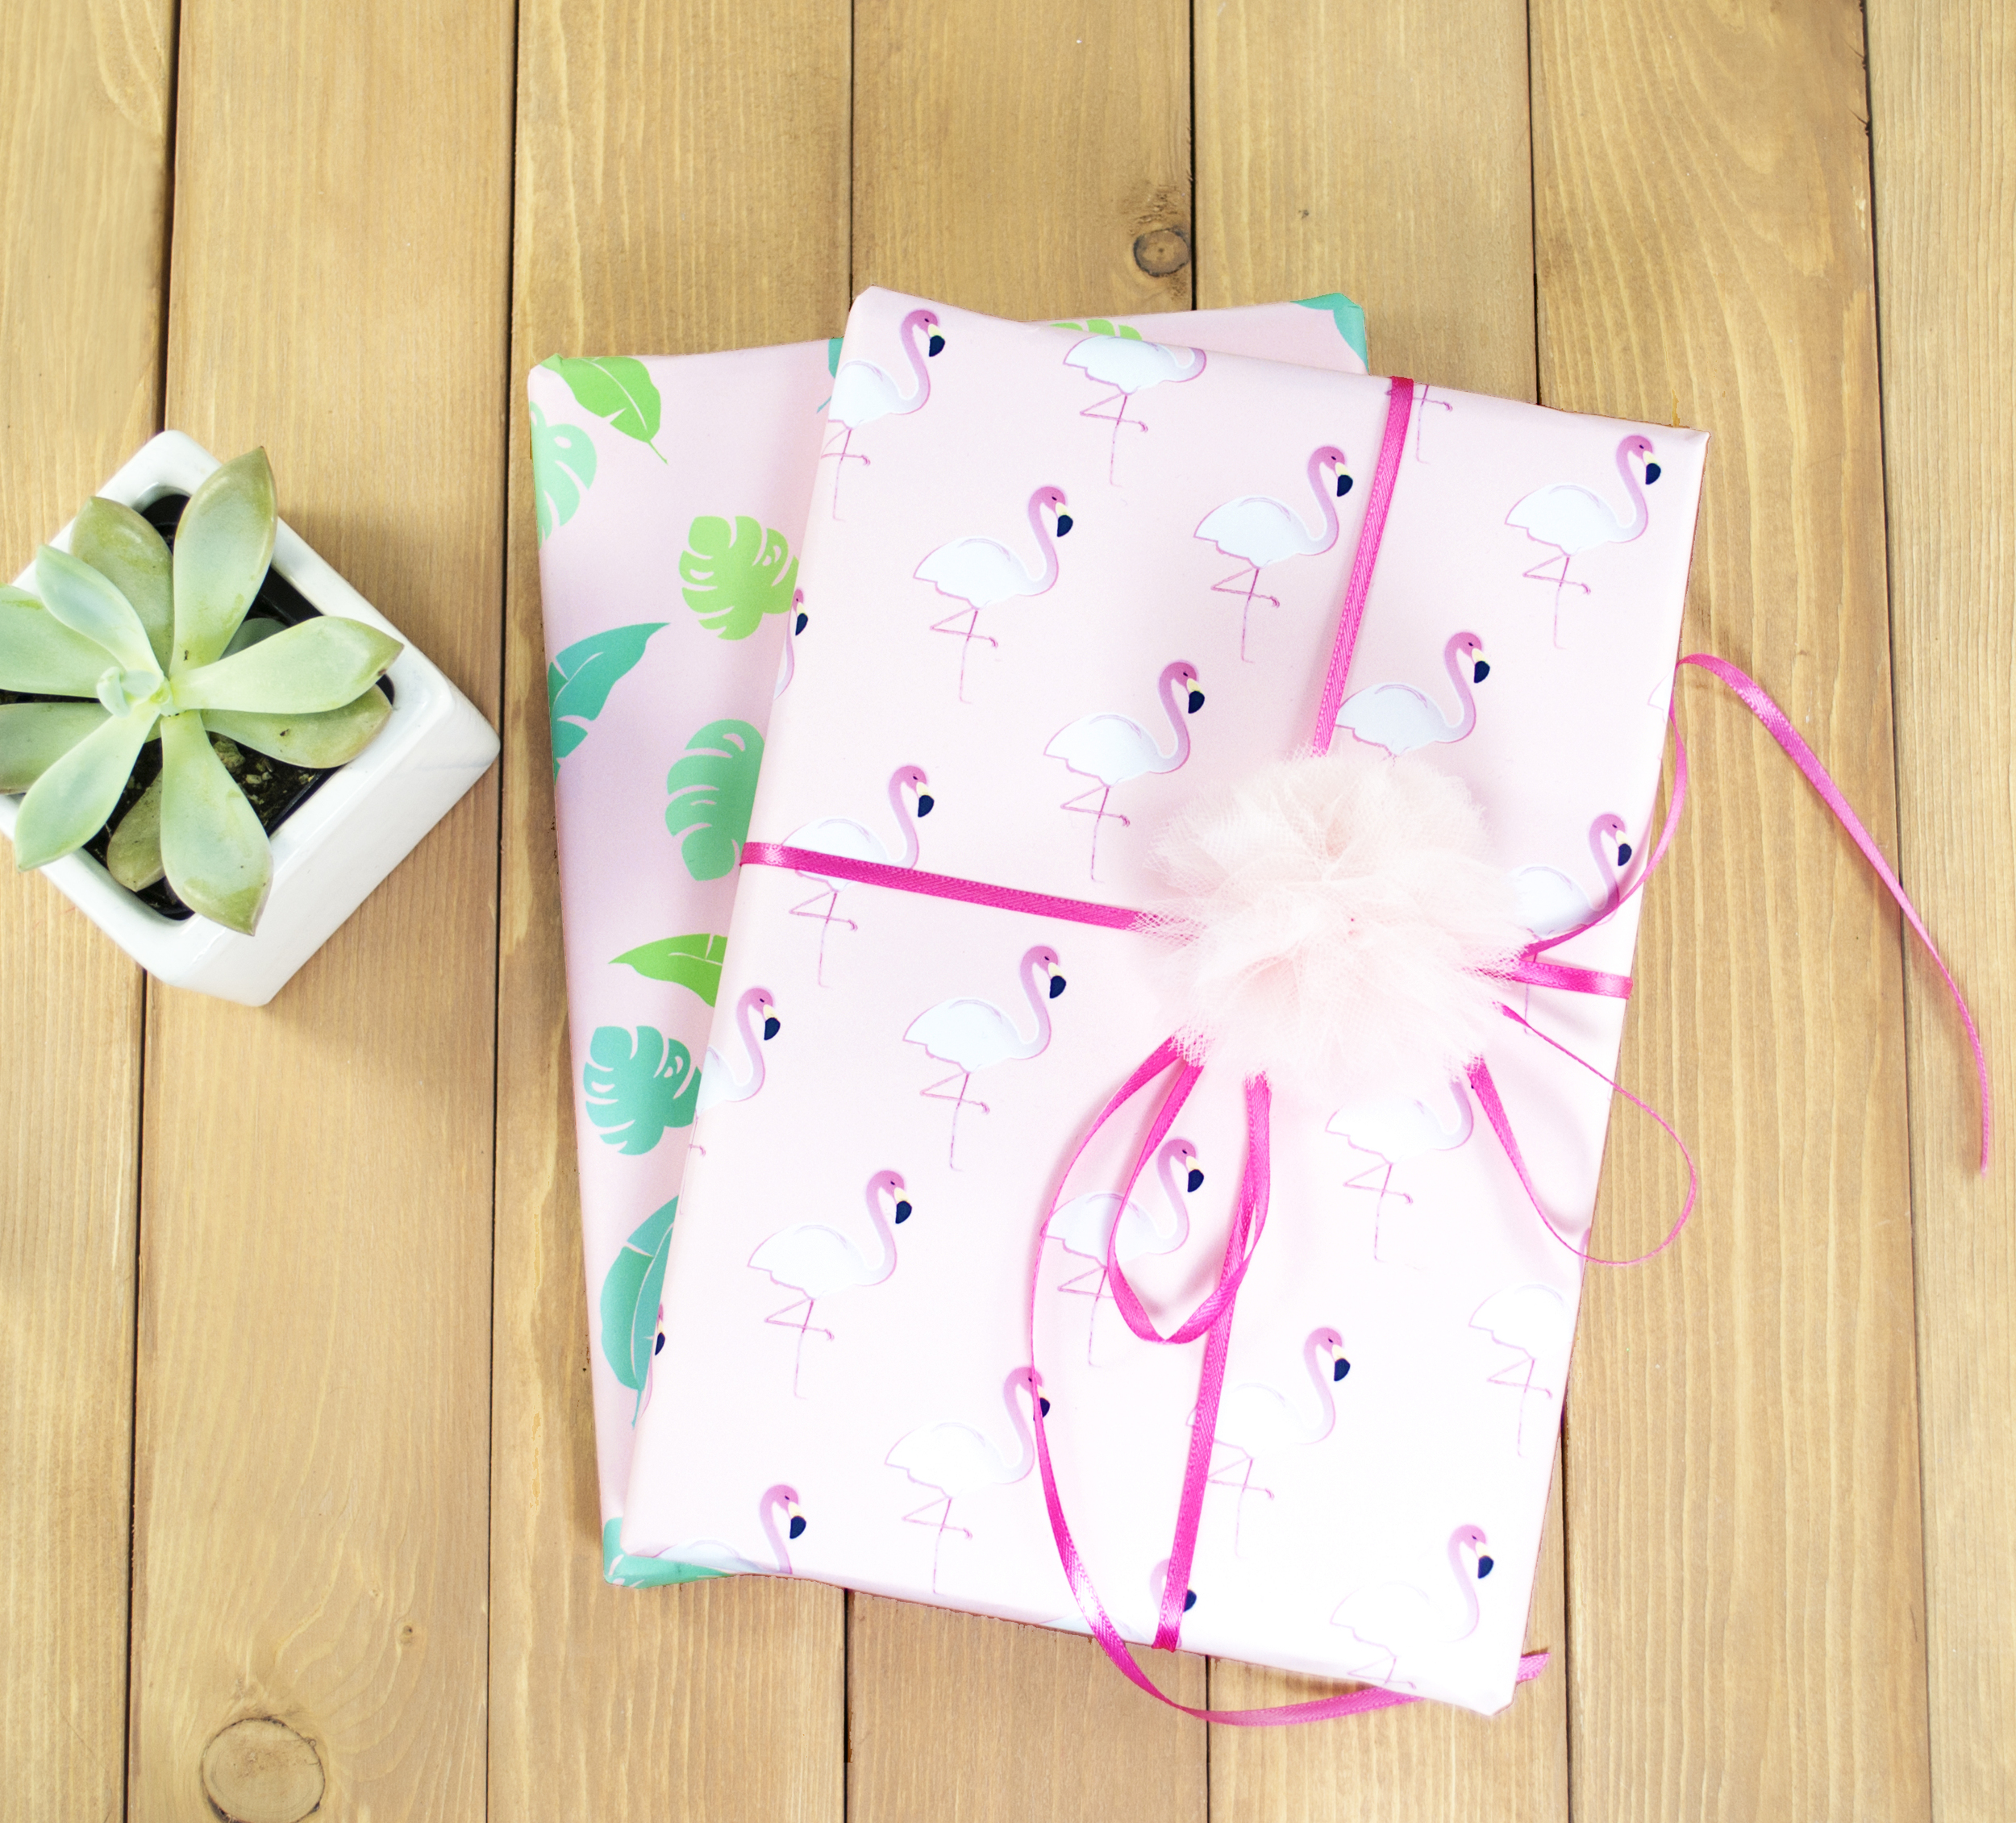 Free printable wrapping paper: 10 designs to download now